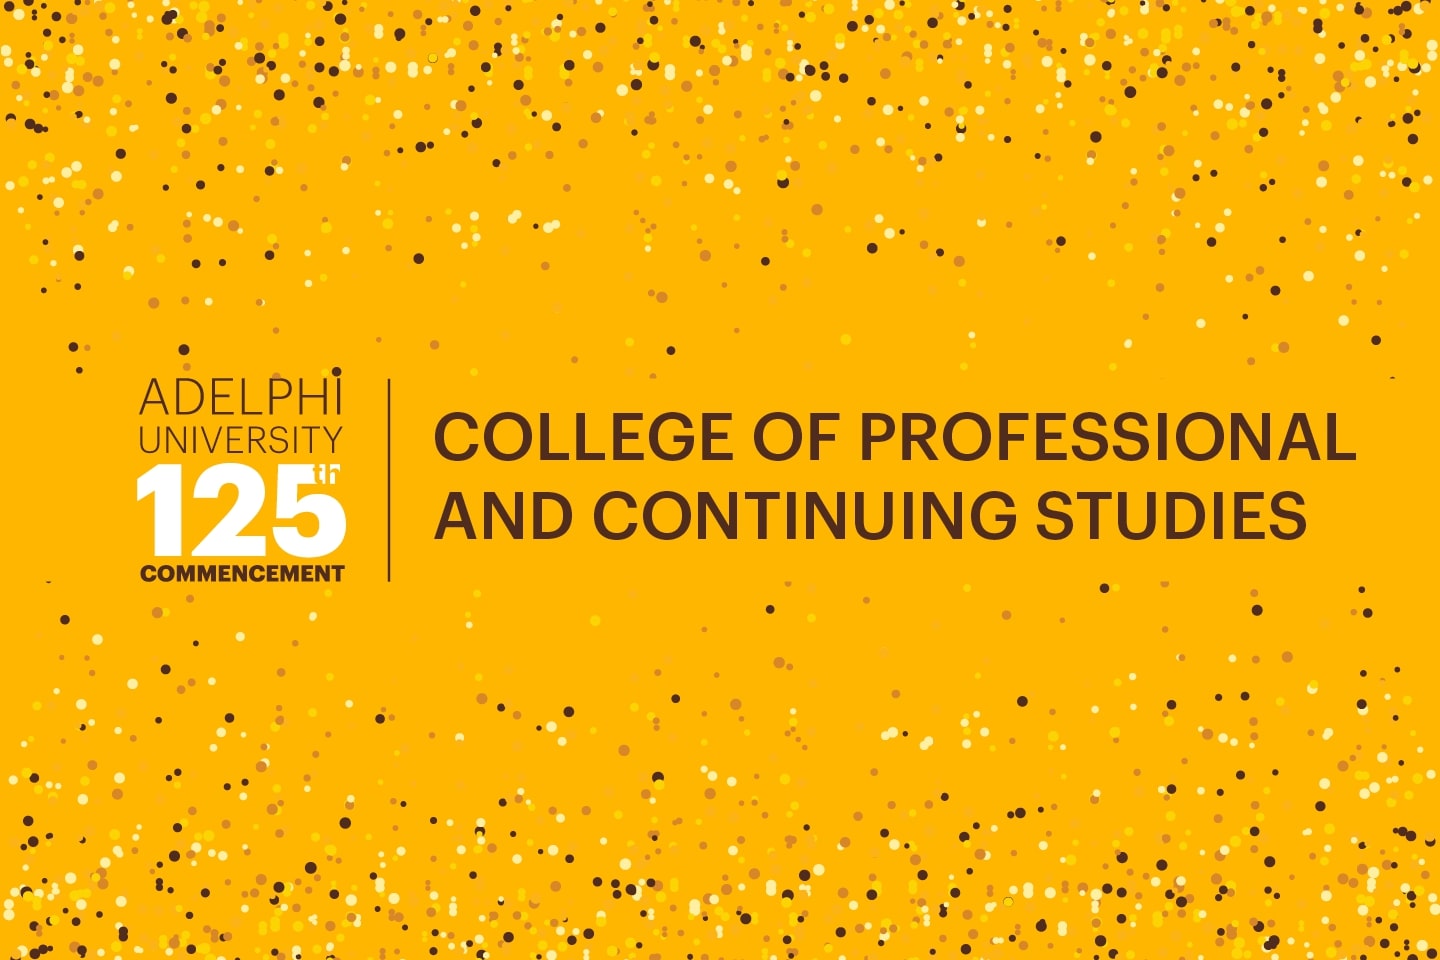 Adelphi University 125th Commencement: College of Professional and Continuing Studies